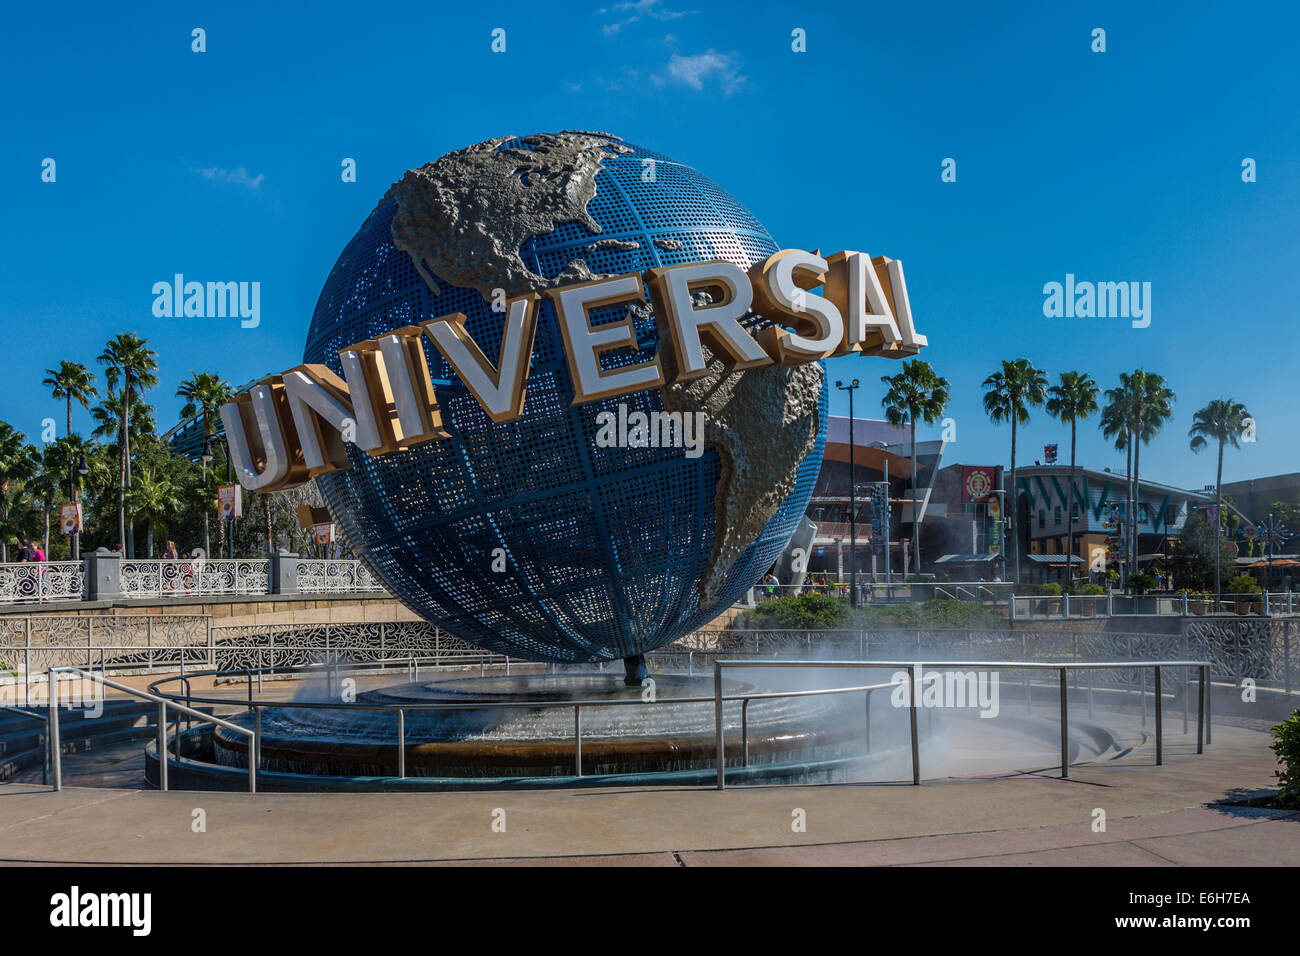 Something big is headed to Universal Orlando's CityWalk. This is